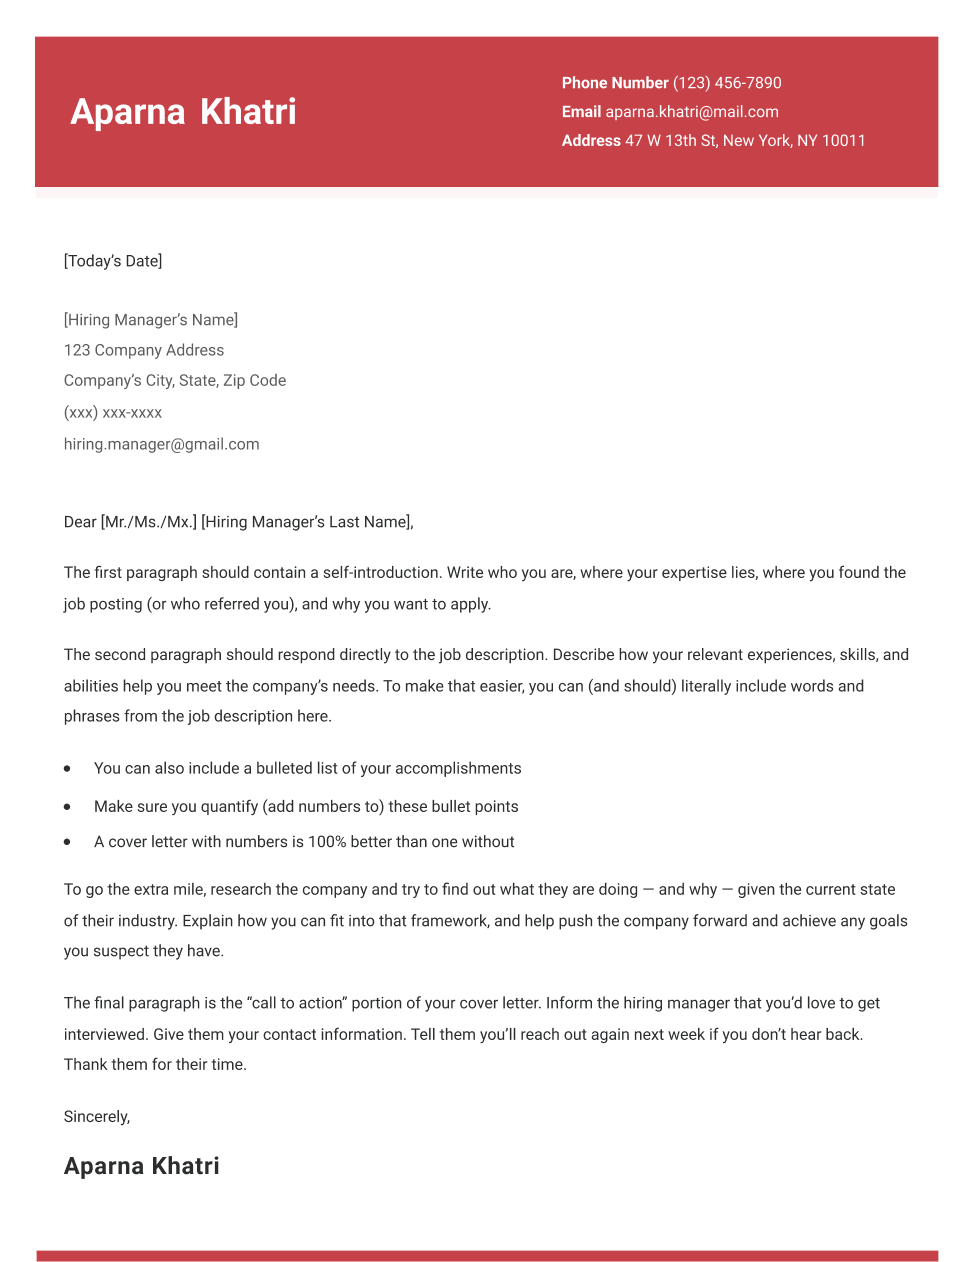 Pantheon cover letter template in red, with a full color header that includes the contact information.